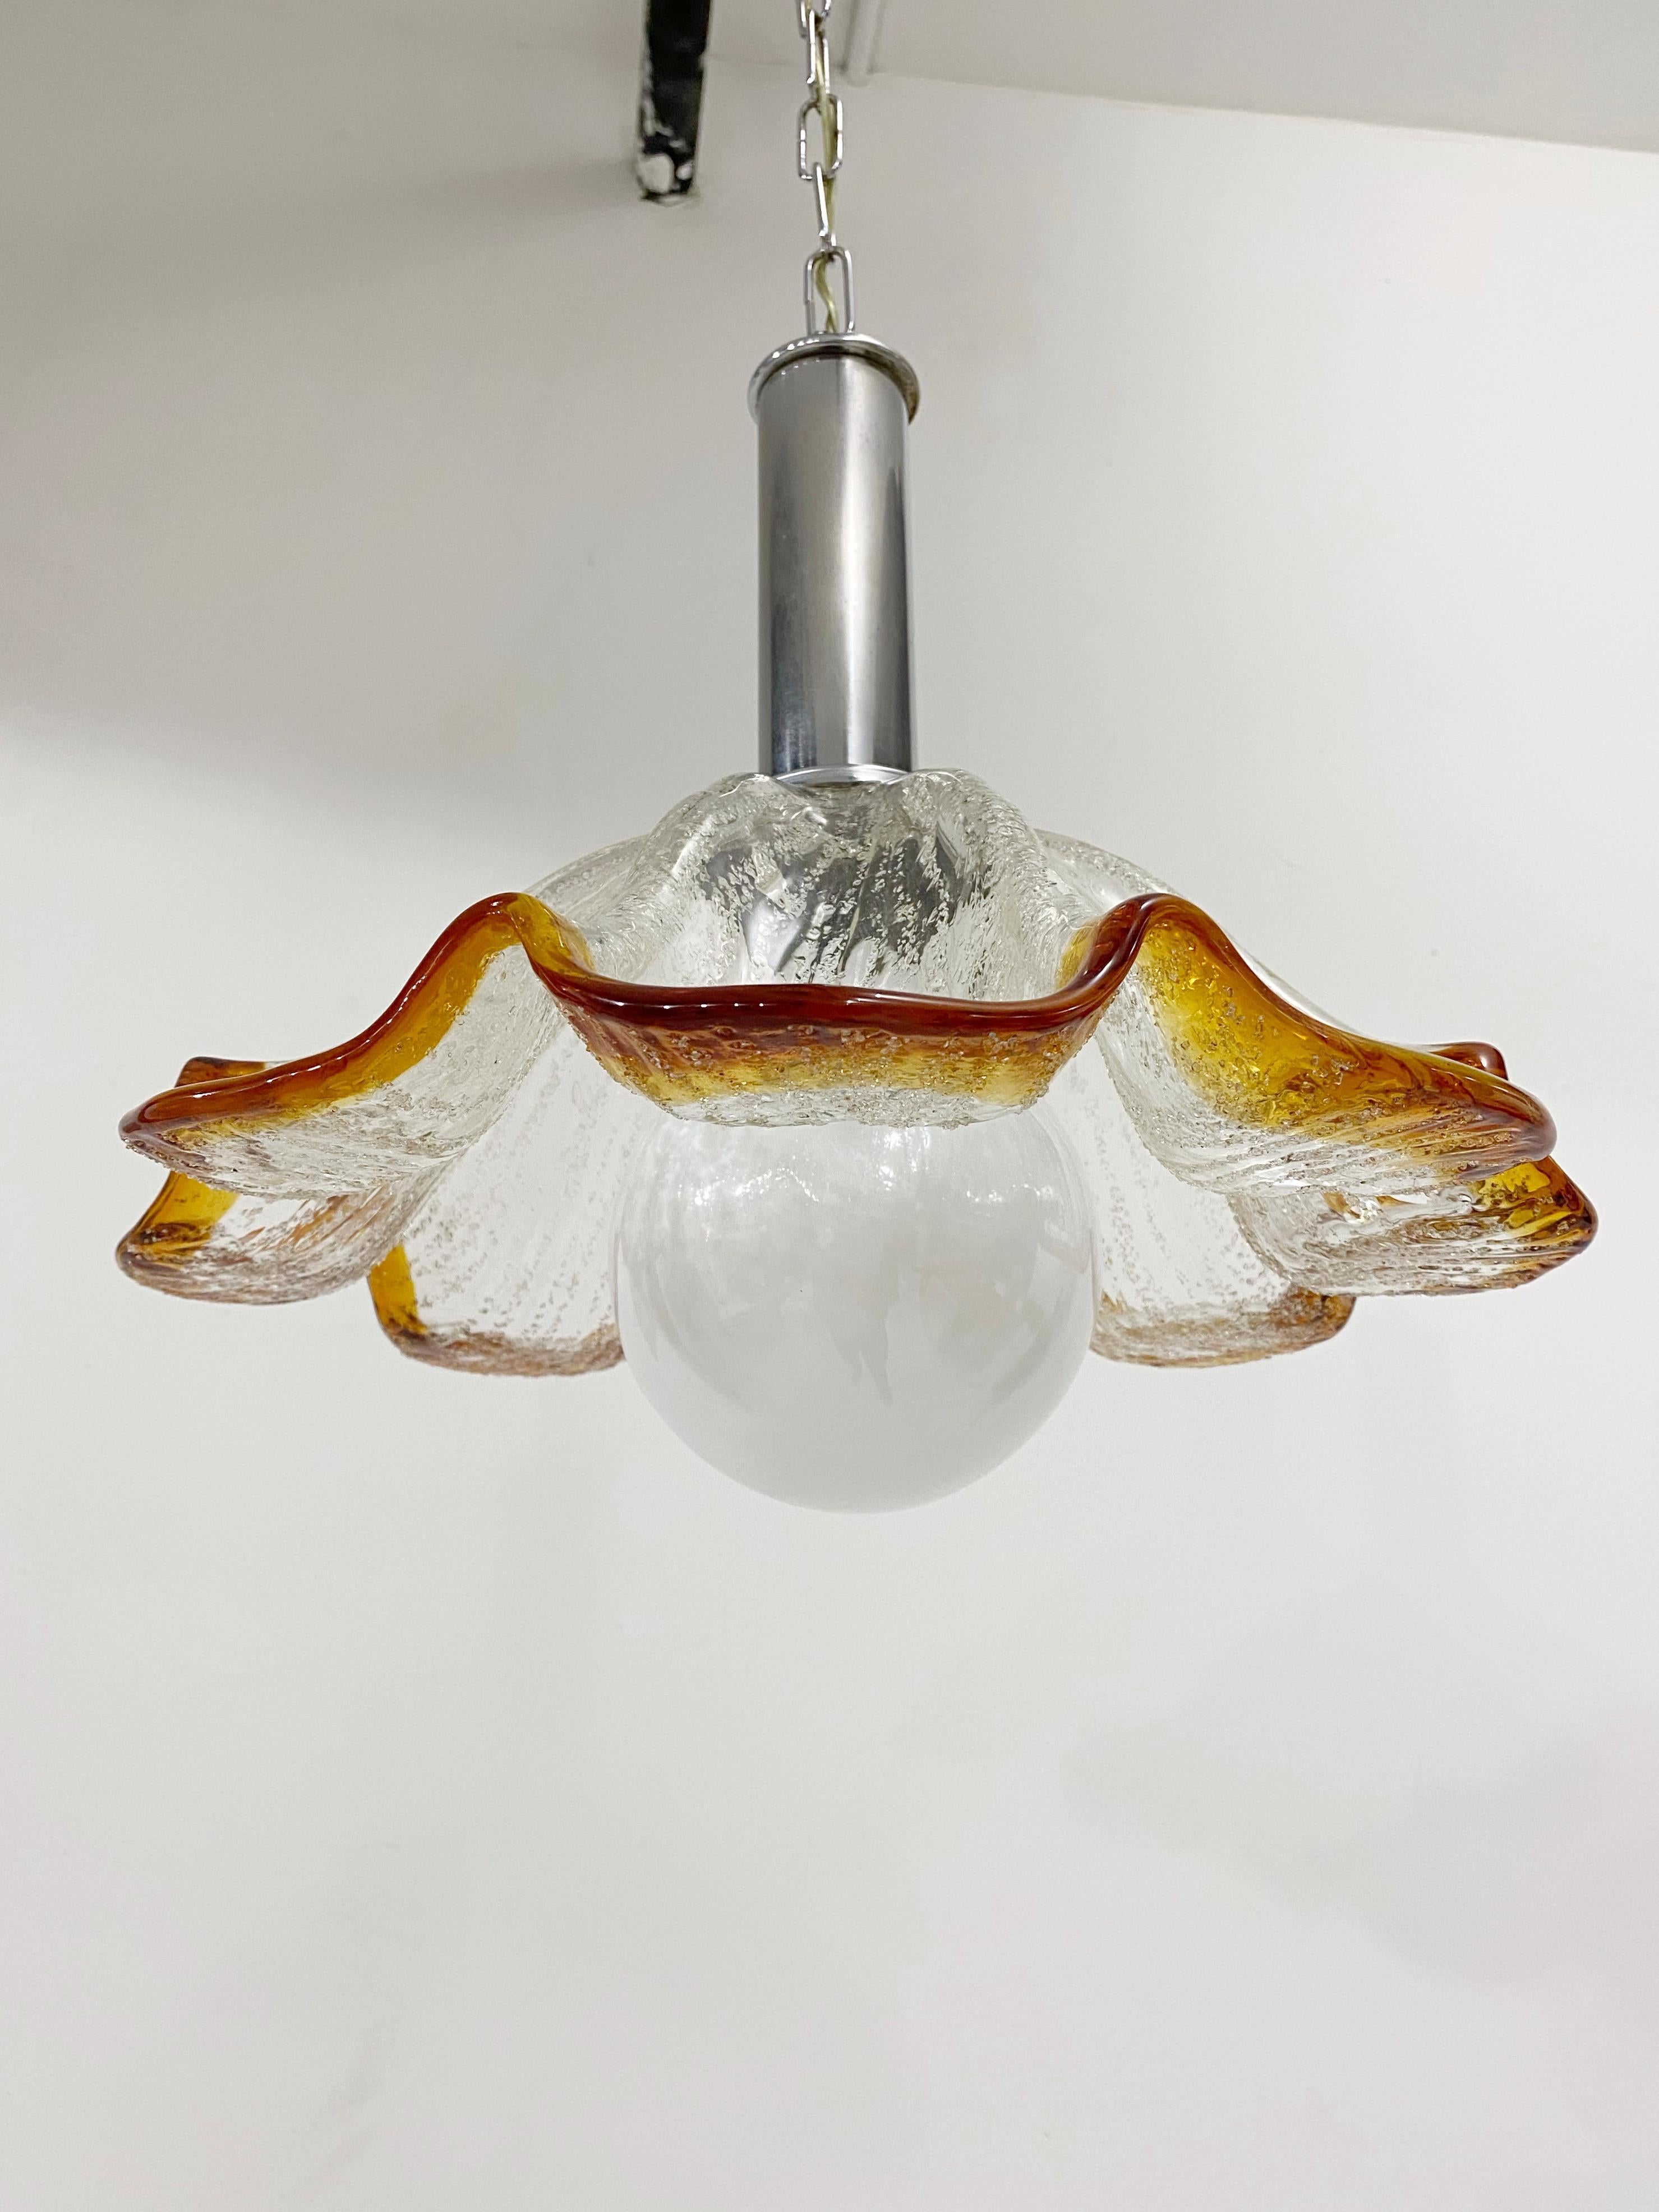 Stunning Murano chandelier pendant. Blown glass flower blossom held by tubular chrome. Fabulous ombré from clear to orange amber color. Includes chain and ceiling canopy, 24.5” long.